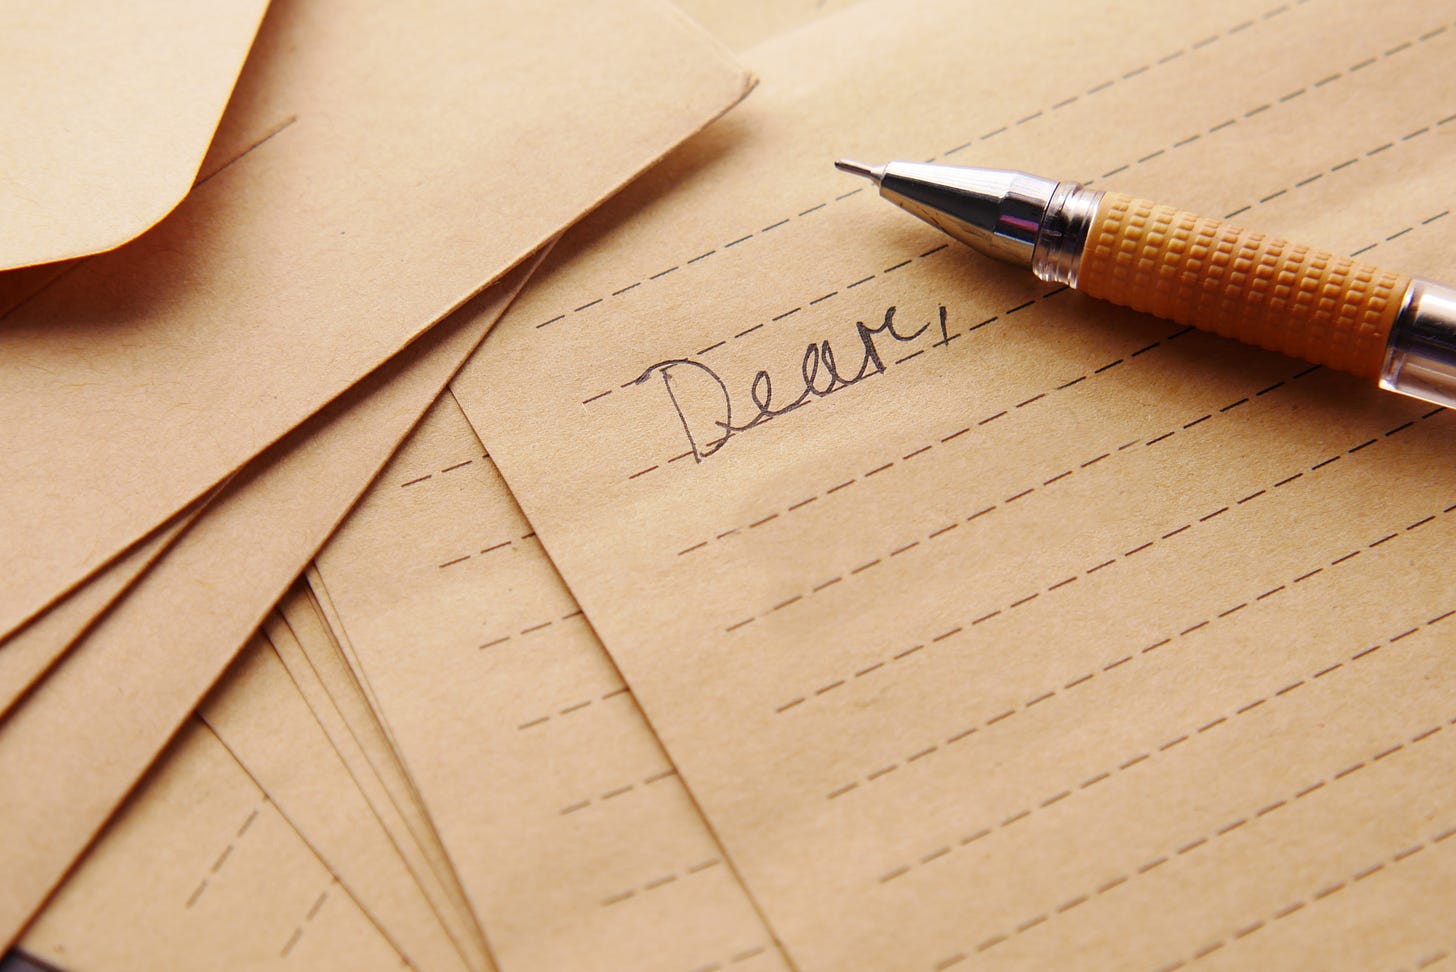 Sheets of lined notepaper with a mechanical pencil; one sheet reads "Dear" in handwriting.